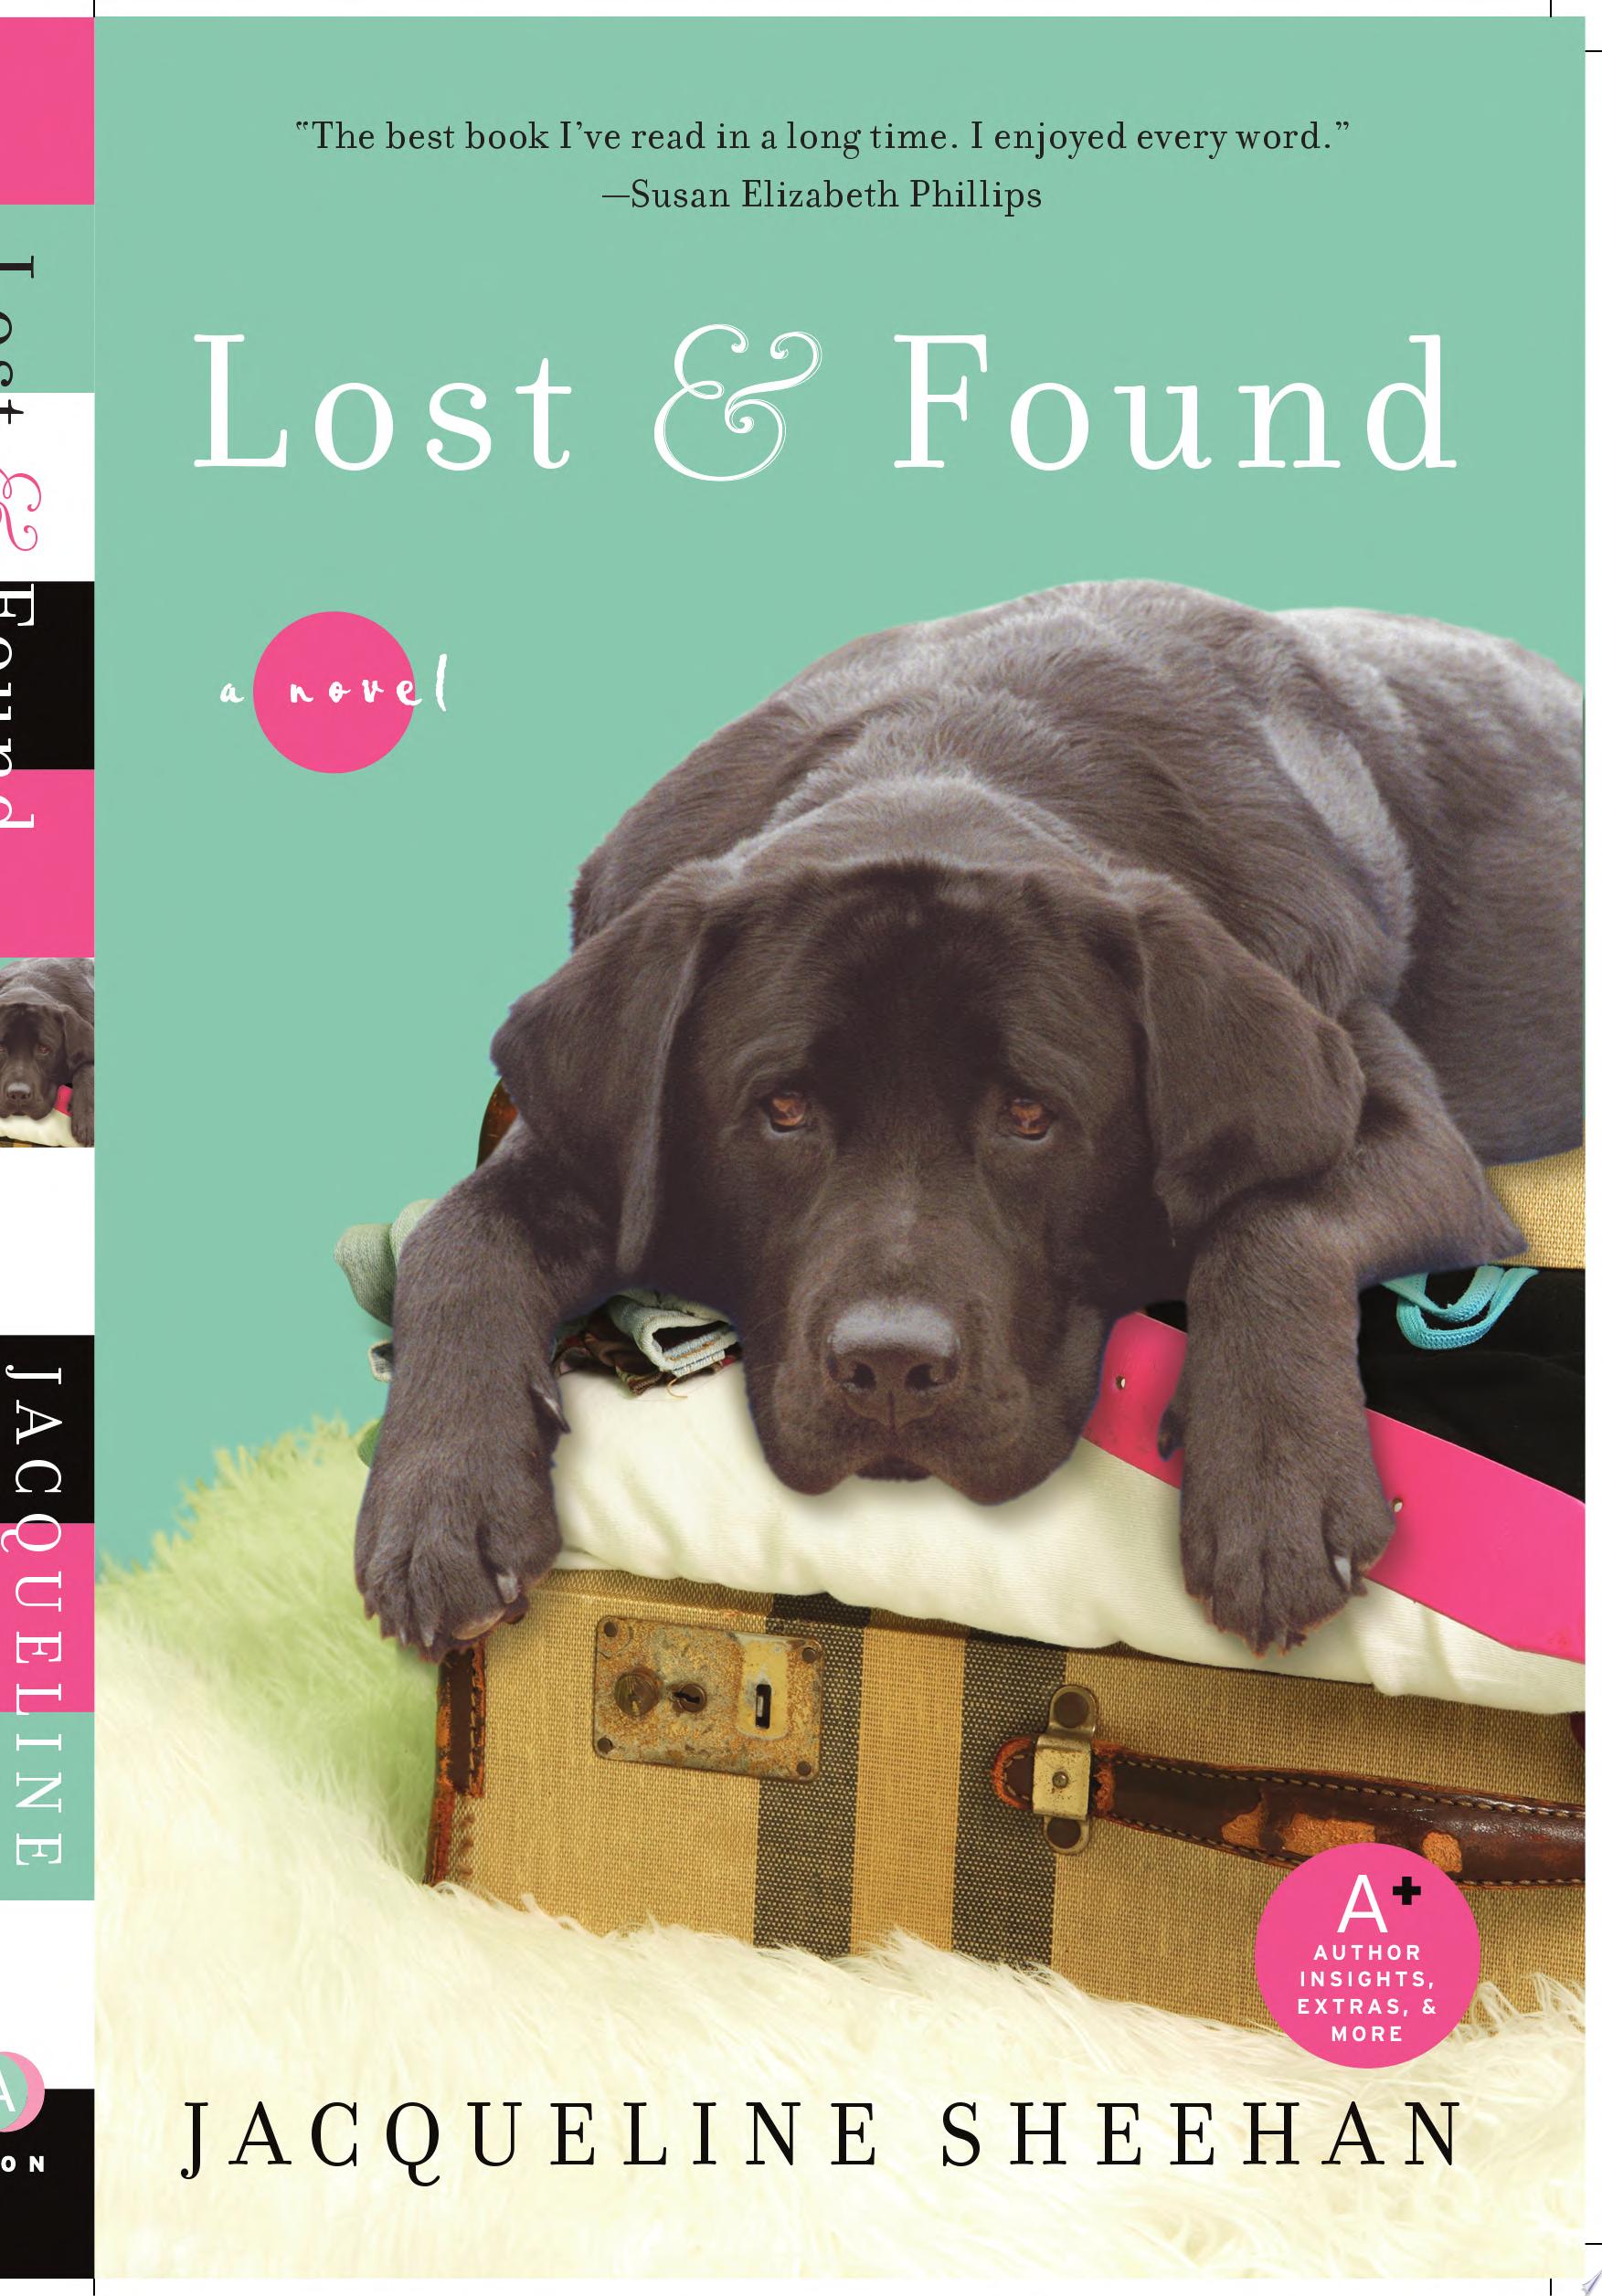 Image for "Lost &amp; Found"